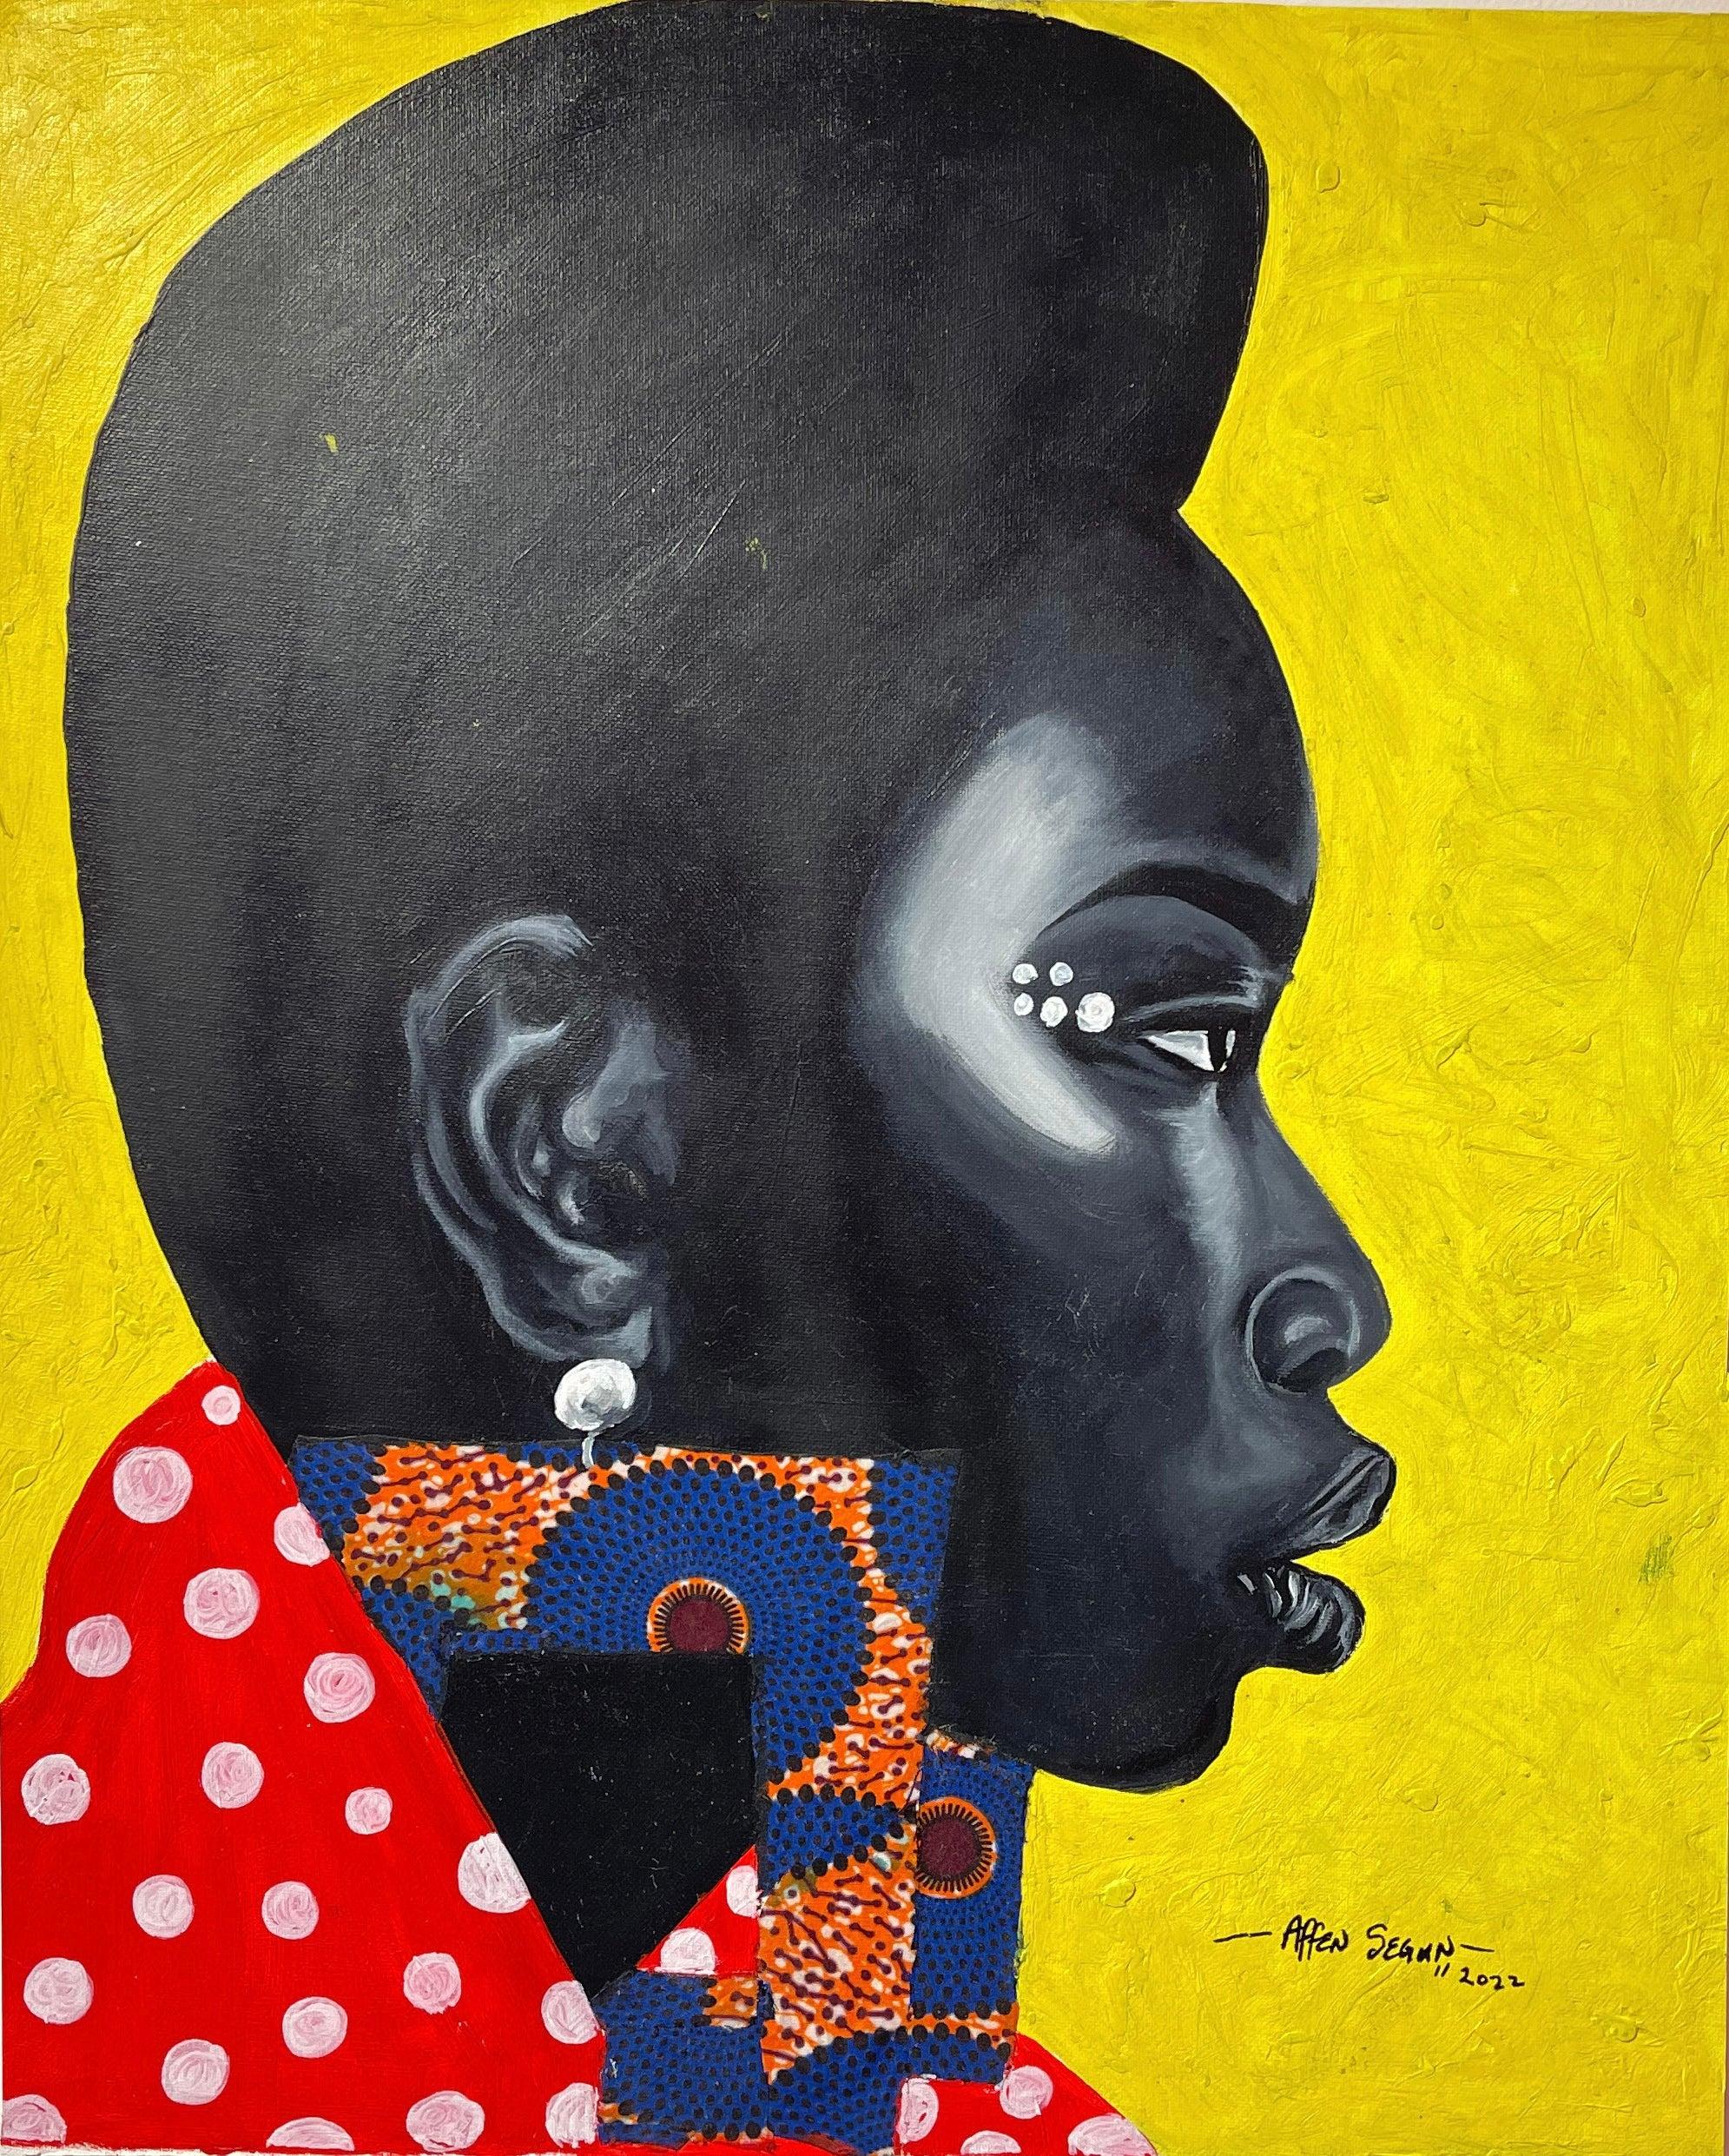 Affen Segun Figurative Painting - "Sisi Black and Shine" Acrylic portrait of Black woman with yellow background